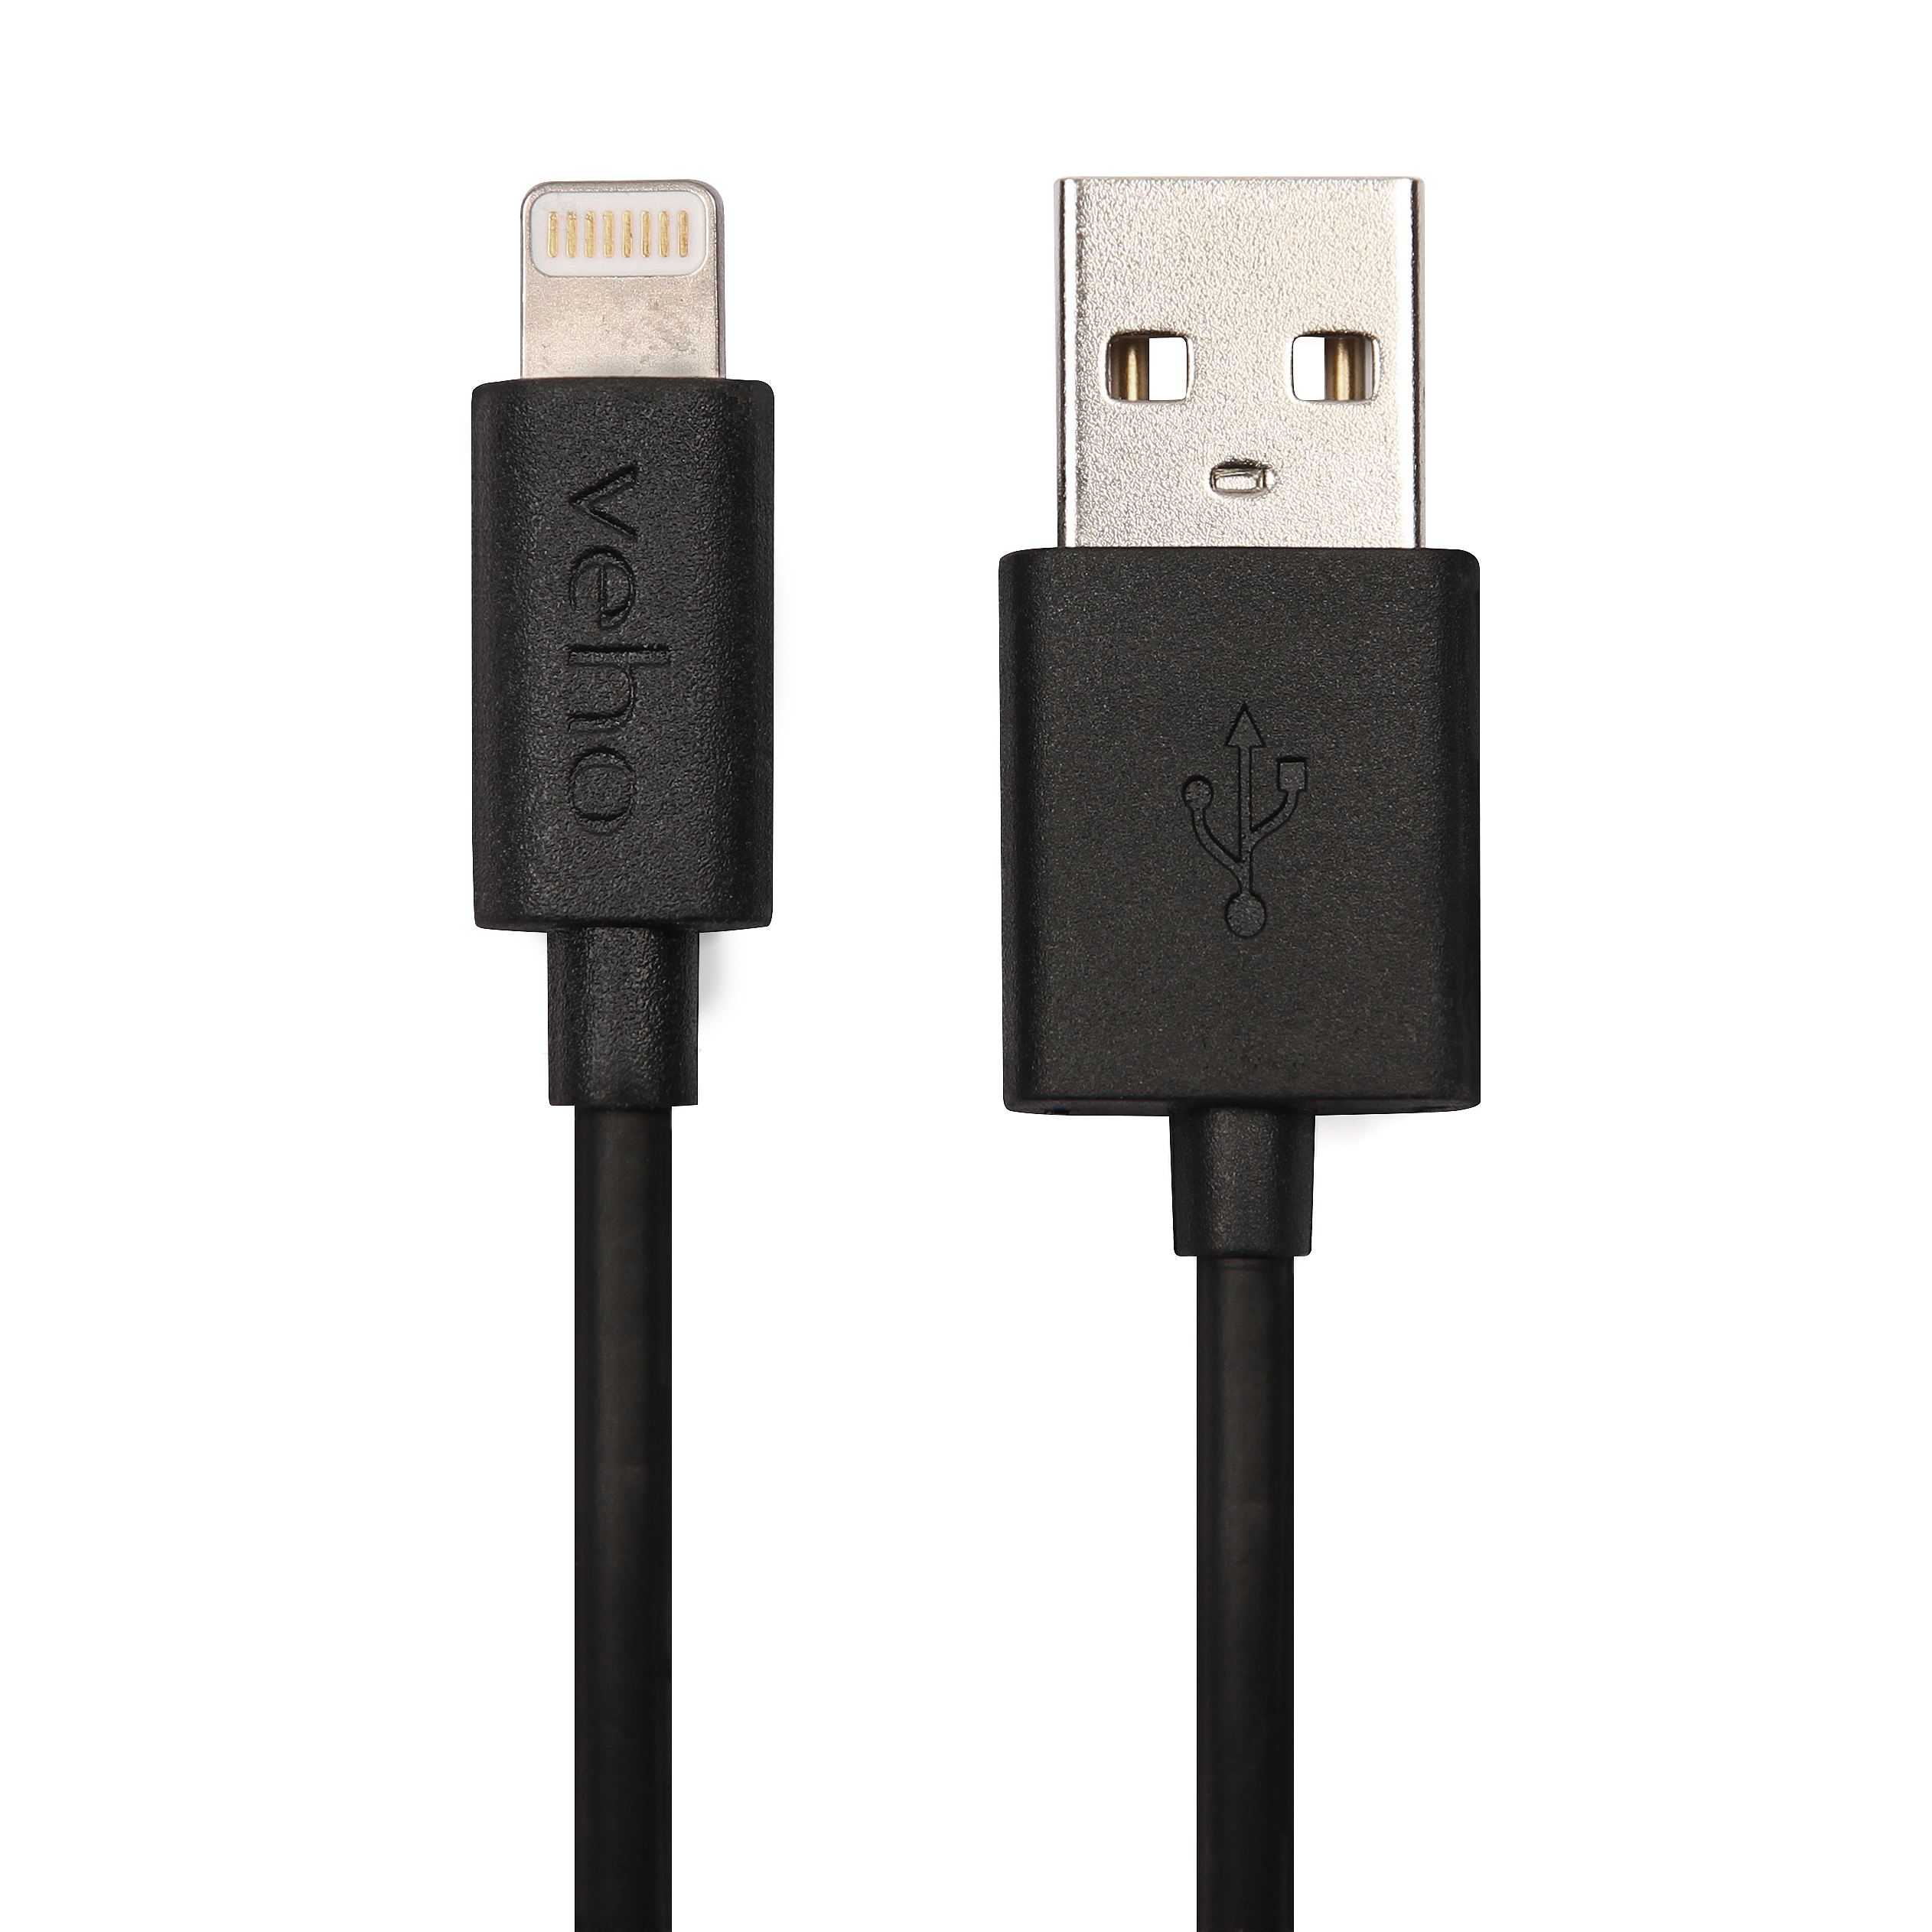 Mfi Lightning To Usb Cable 1m/3.3ft Vpp-501-1m - WC01